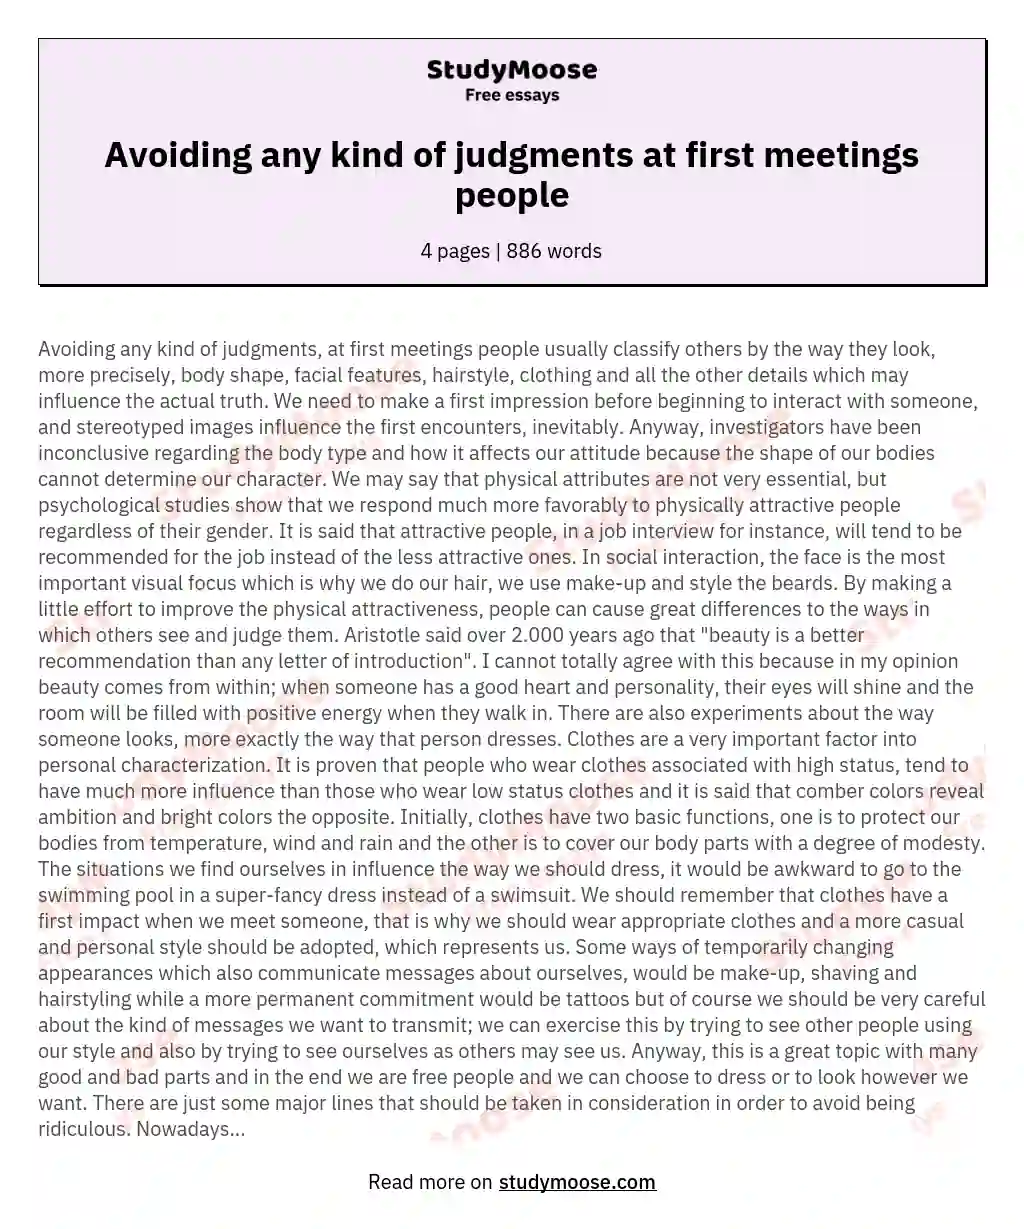 Avoiding any kind of judgments at first meetings people